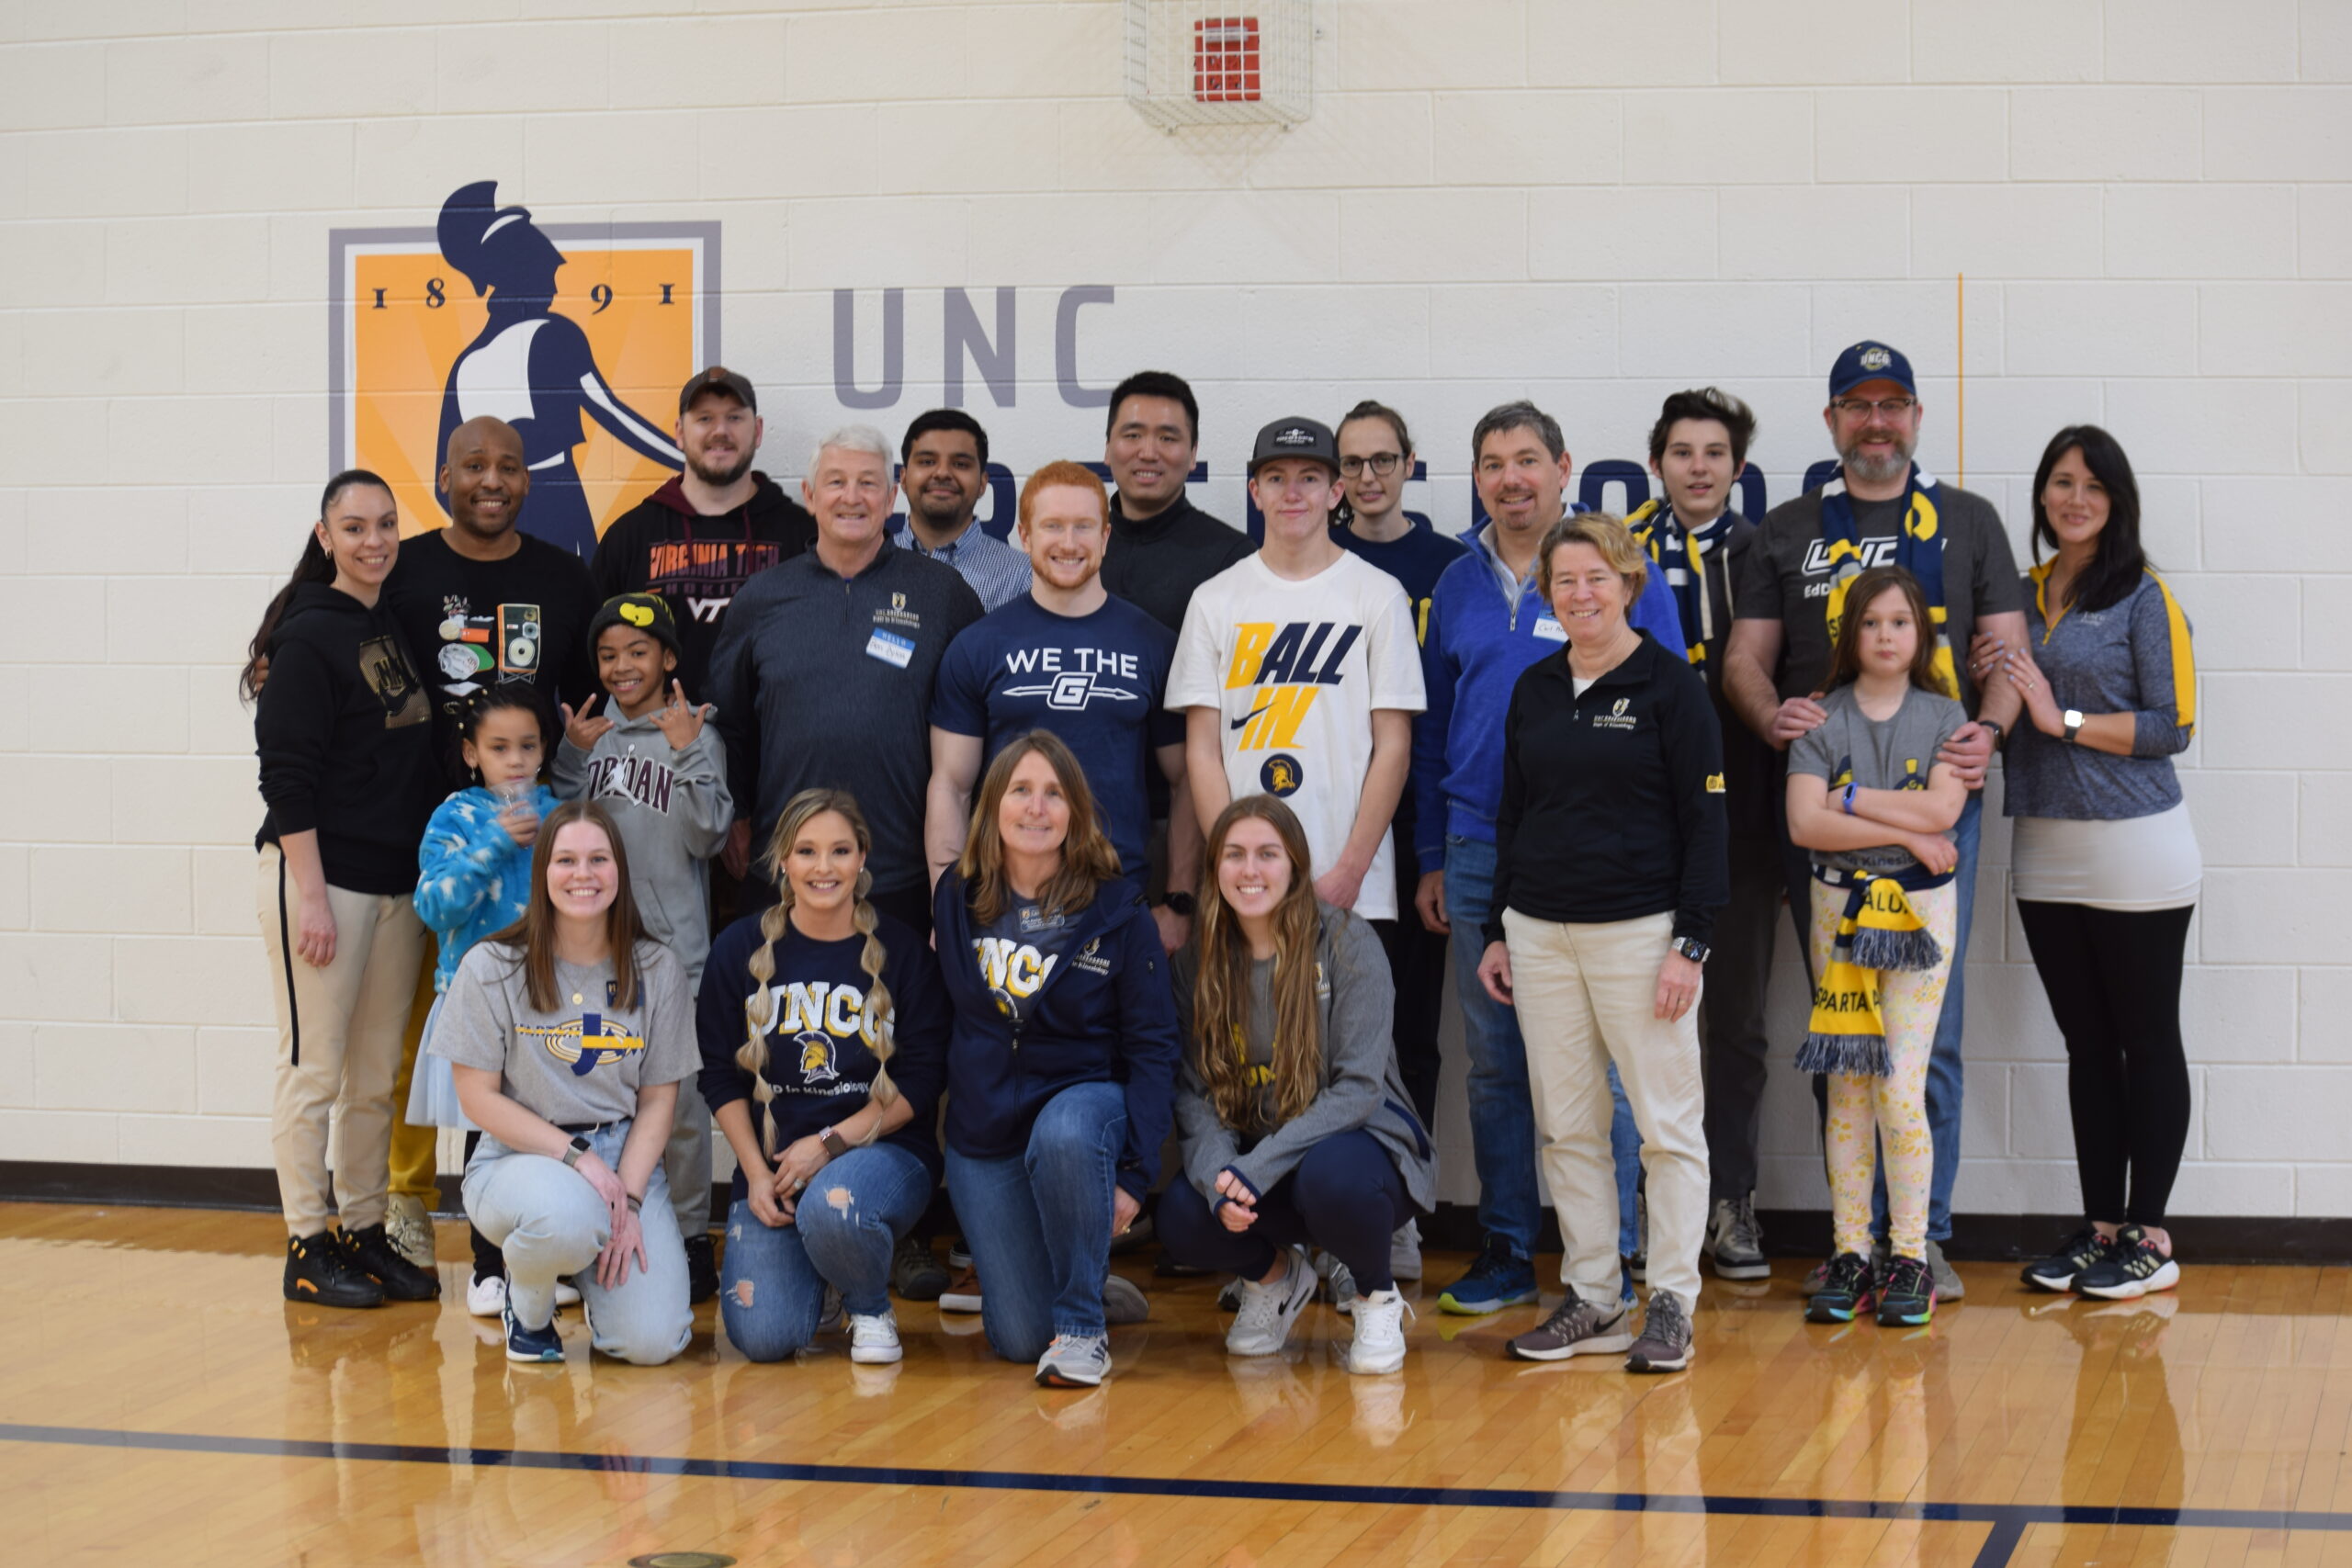 Ed.D. in Kinesiology hosts social for UNCG basketball game